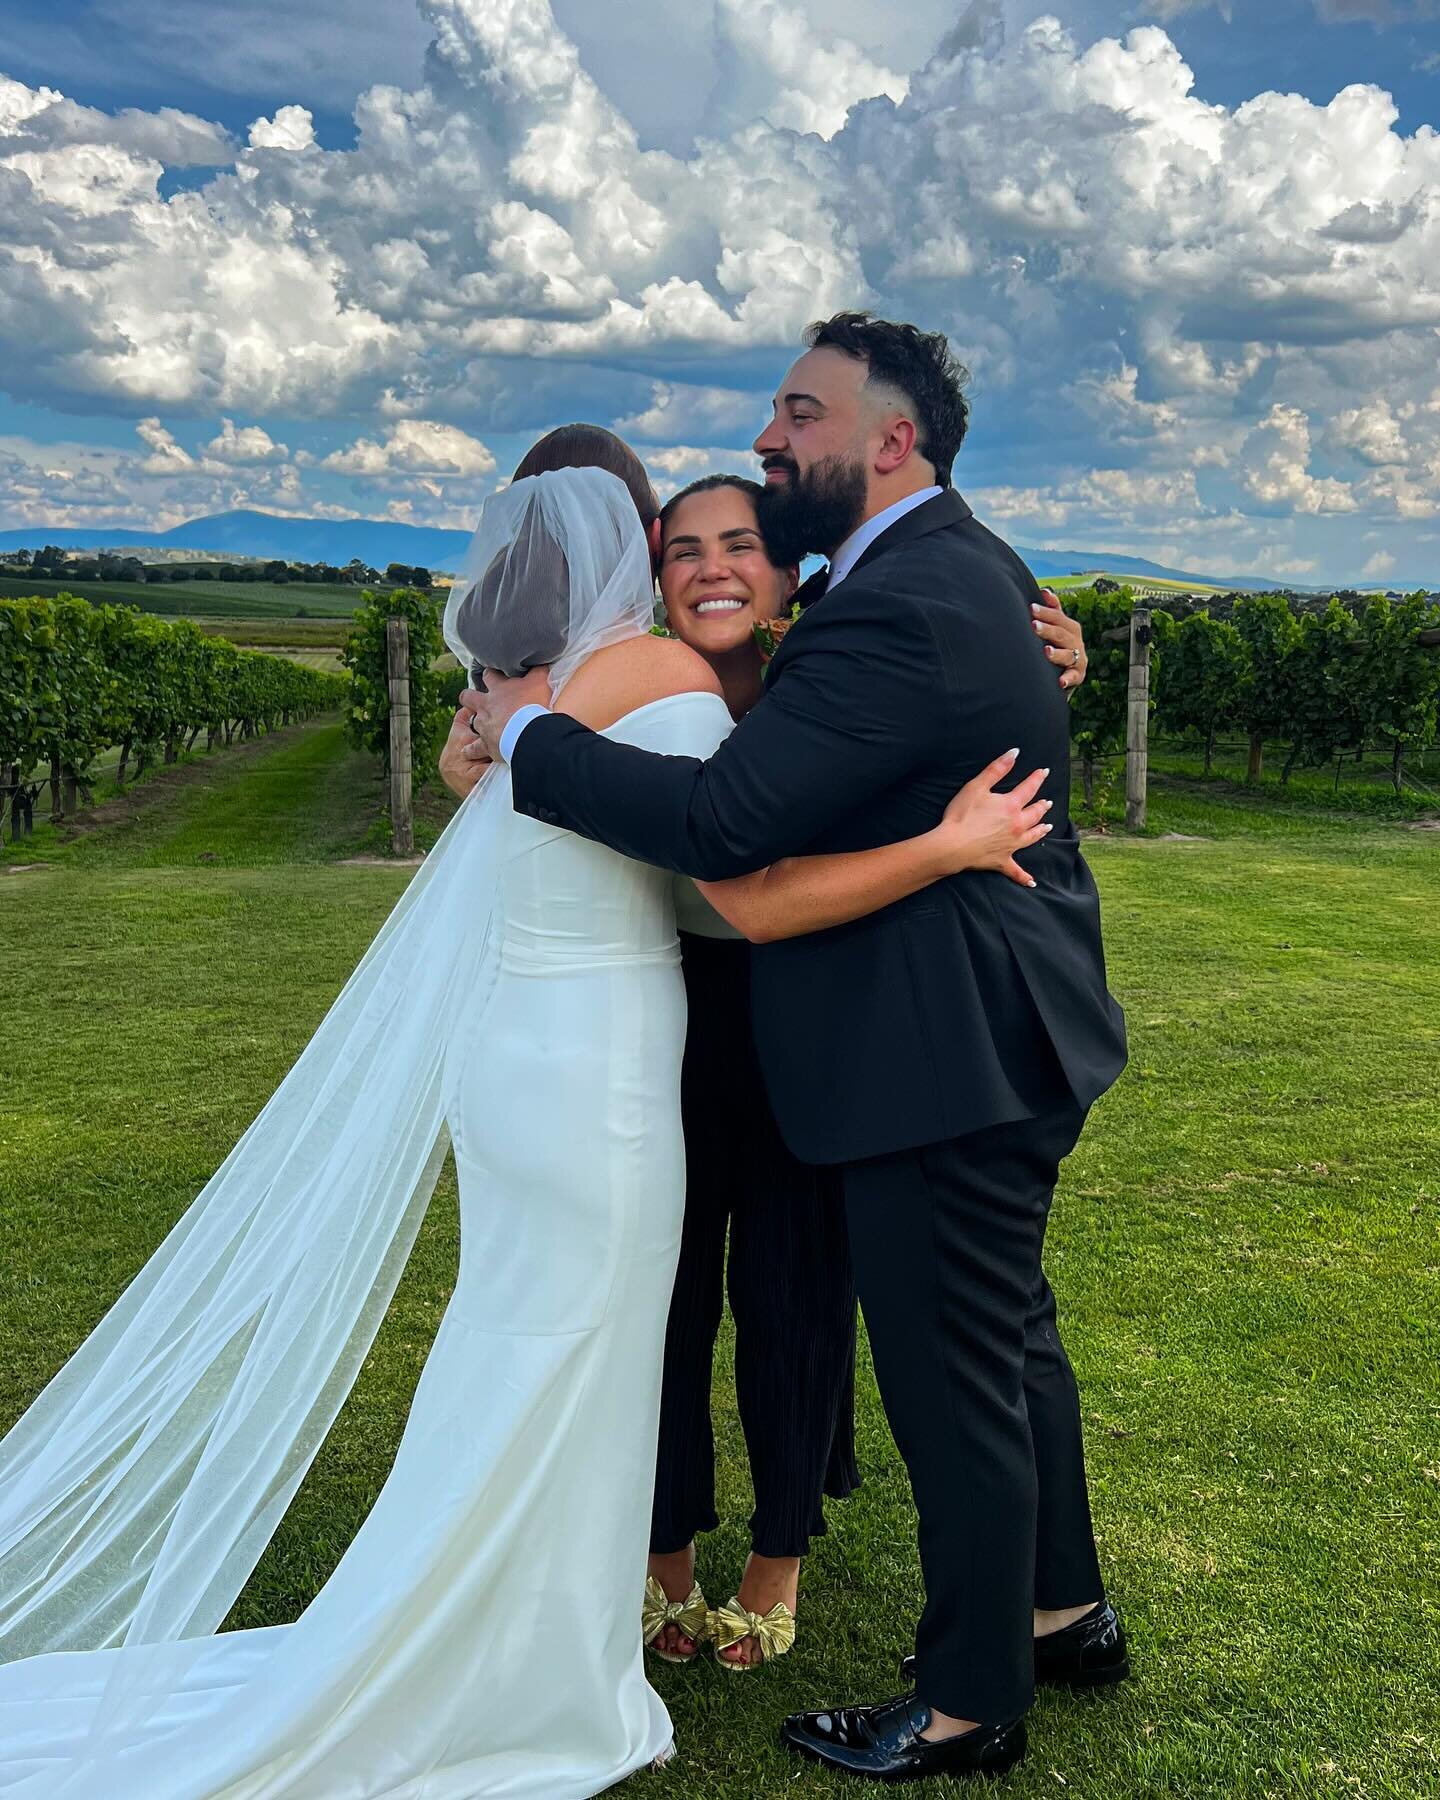 Alysha &amp; Adrian! One of the most warm, kind &amp; down to earth couples I&rsquo;ve had the pleasure of marrying. They&rsquo;re the kind of couple you tell your friends about when they ask &lsquo;who you marrying this weekend?&rsquo;&hellip;the so